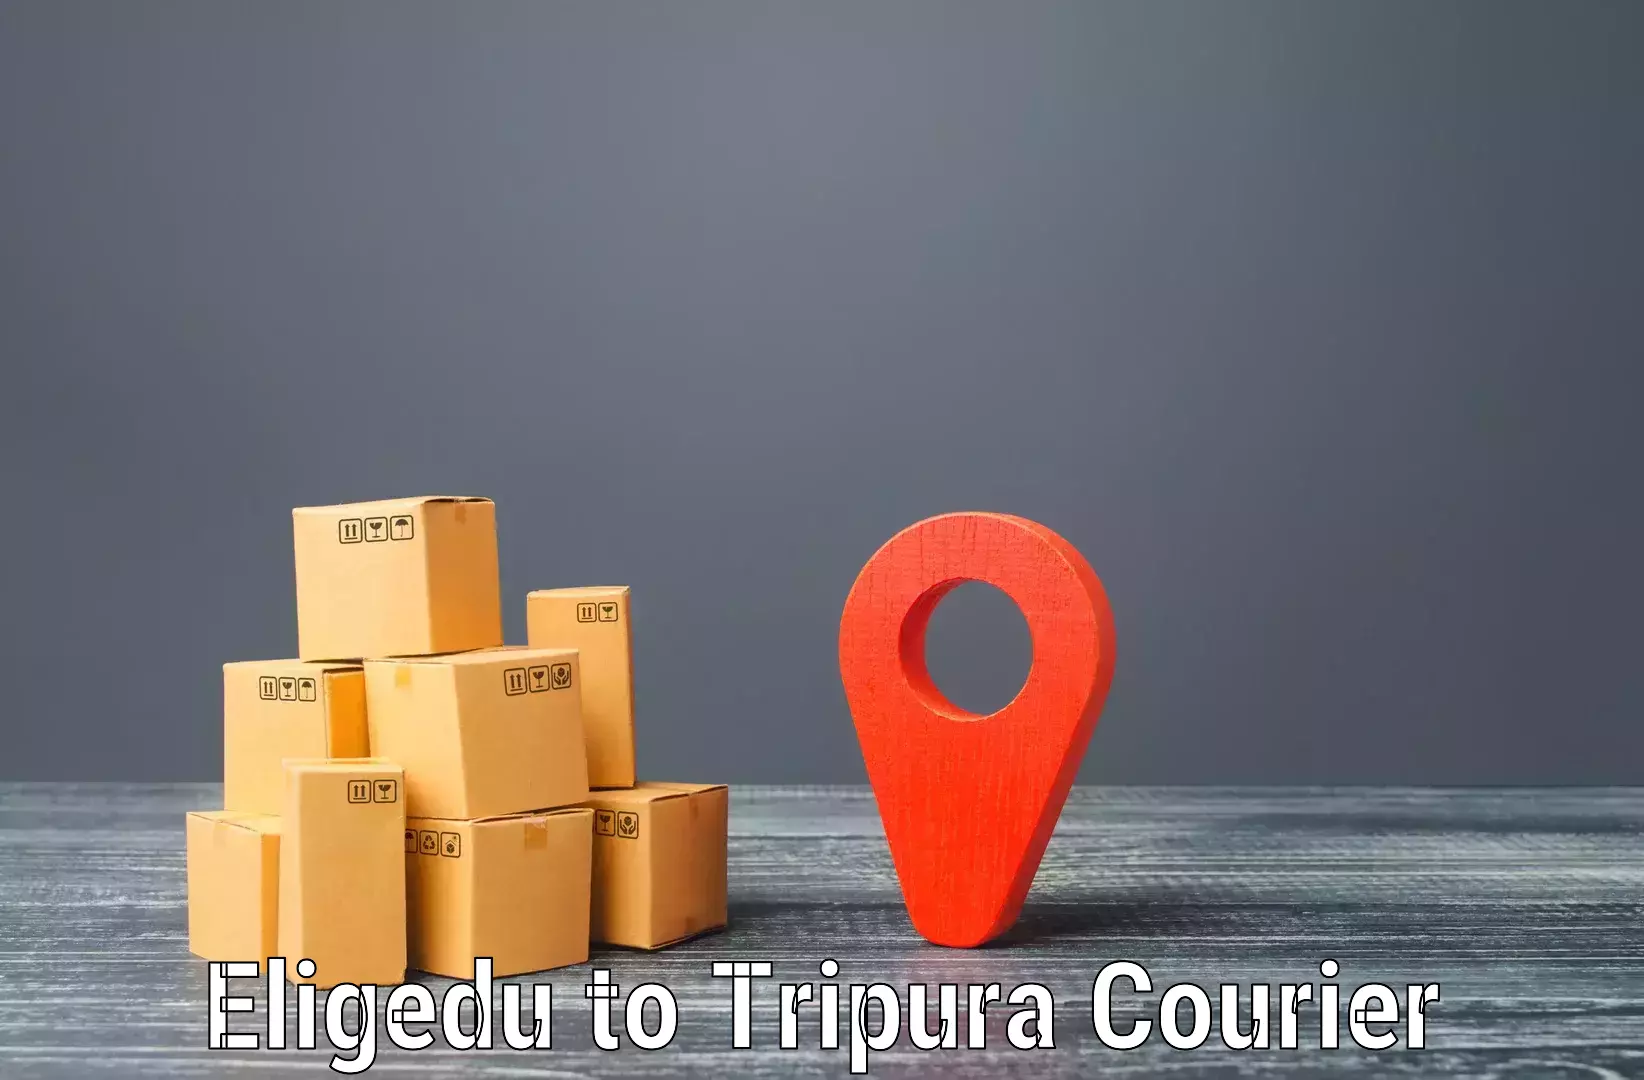 Round-the-clock parcel delivery Eligedu to Udaipur Tripura